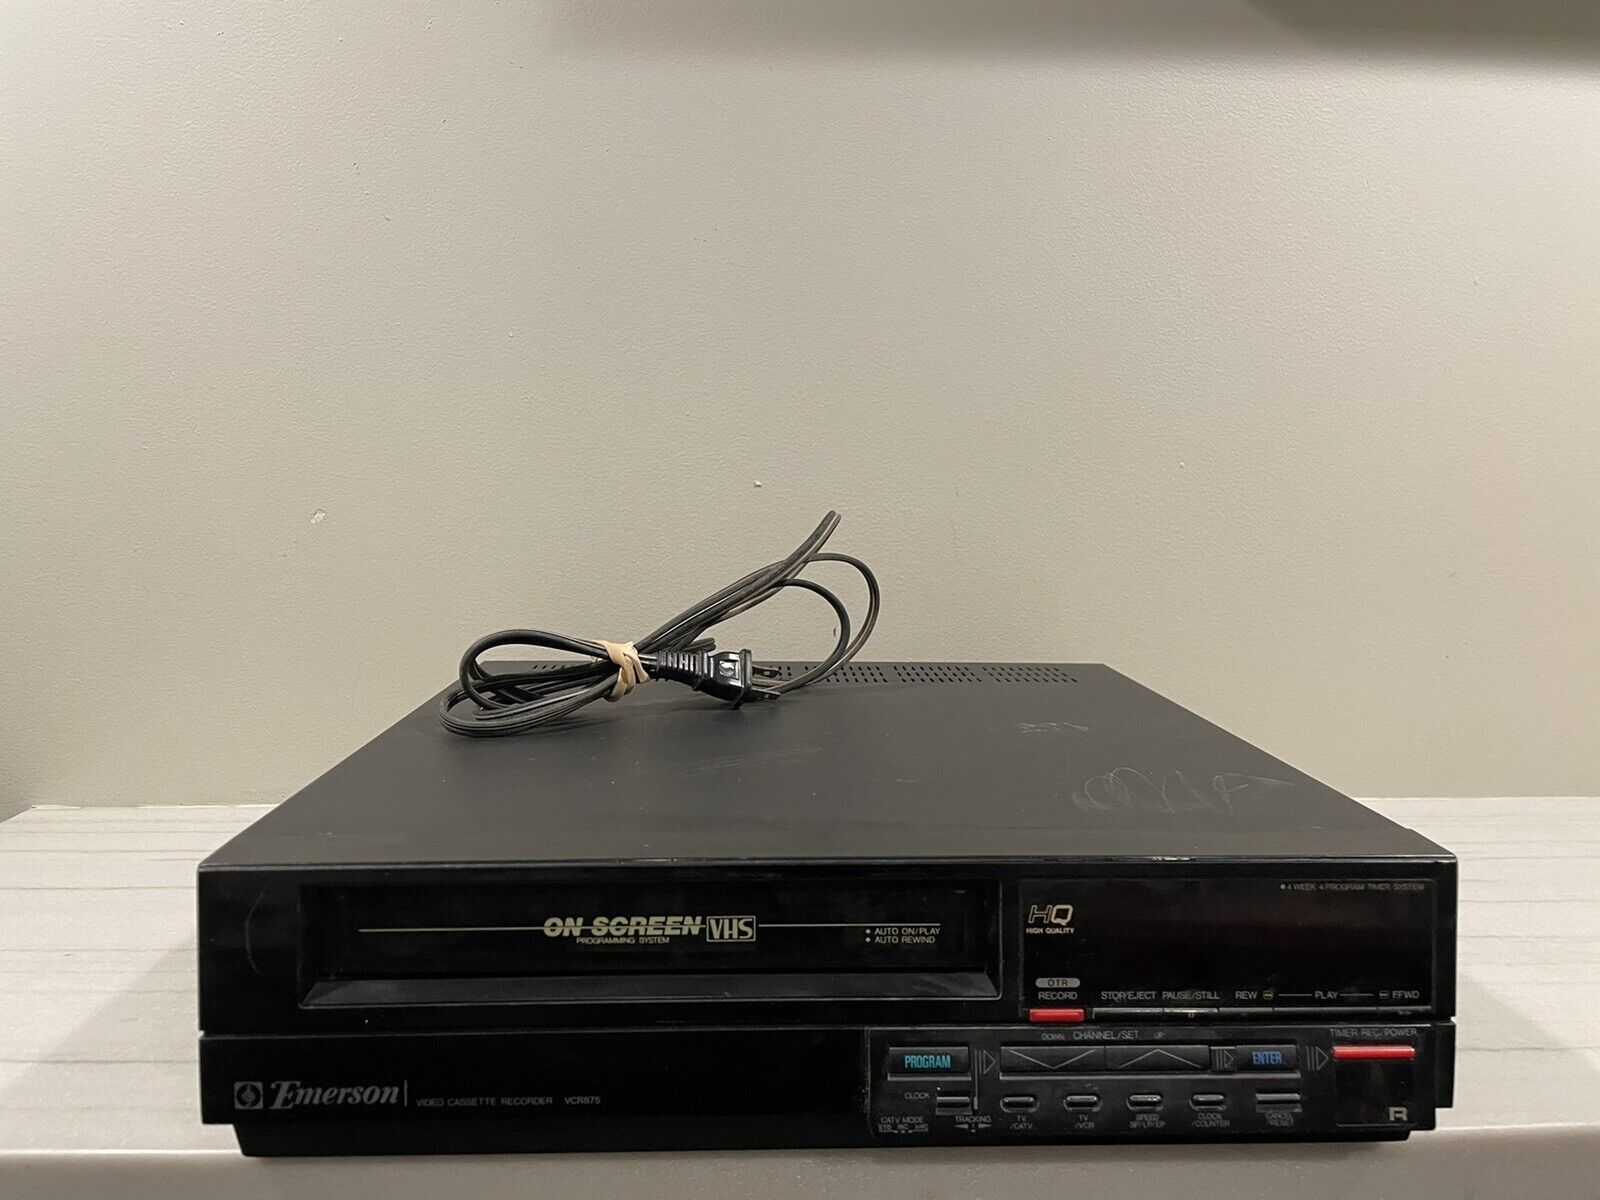 Emerson Vcr875 Vhs Player/recorder Video Cassette Recorder Vintage For Repair